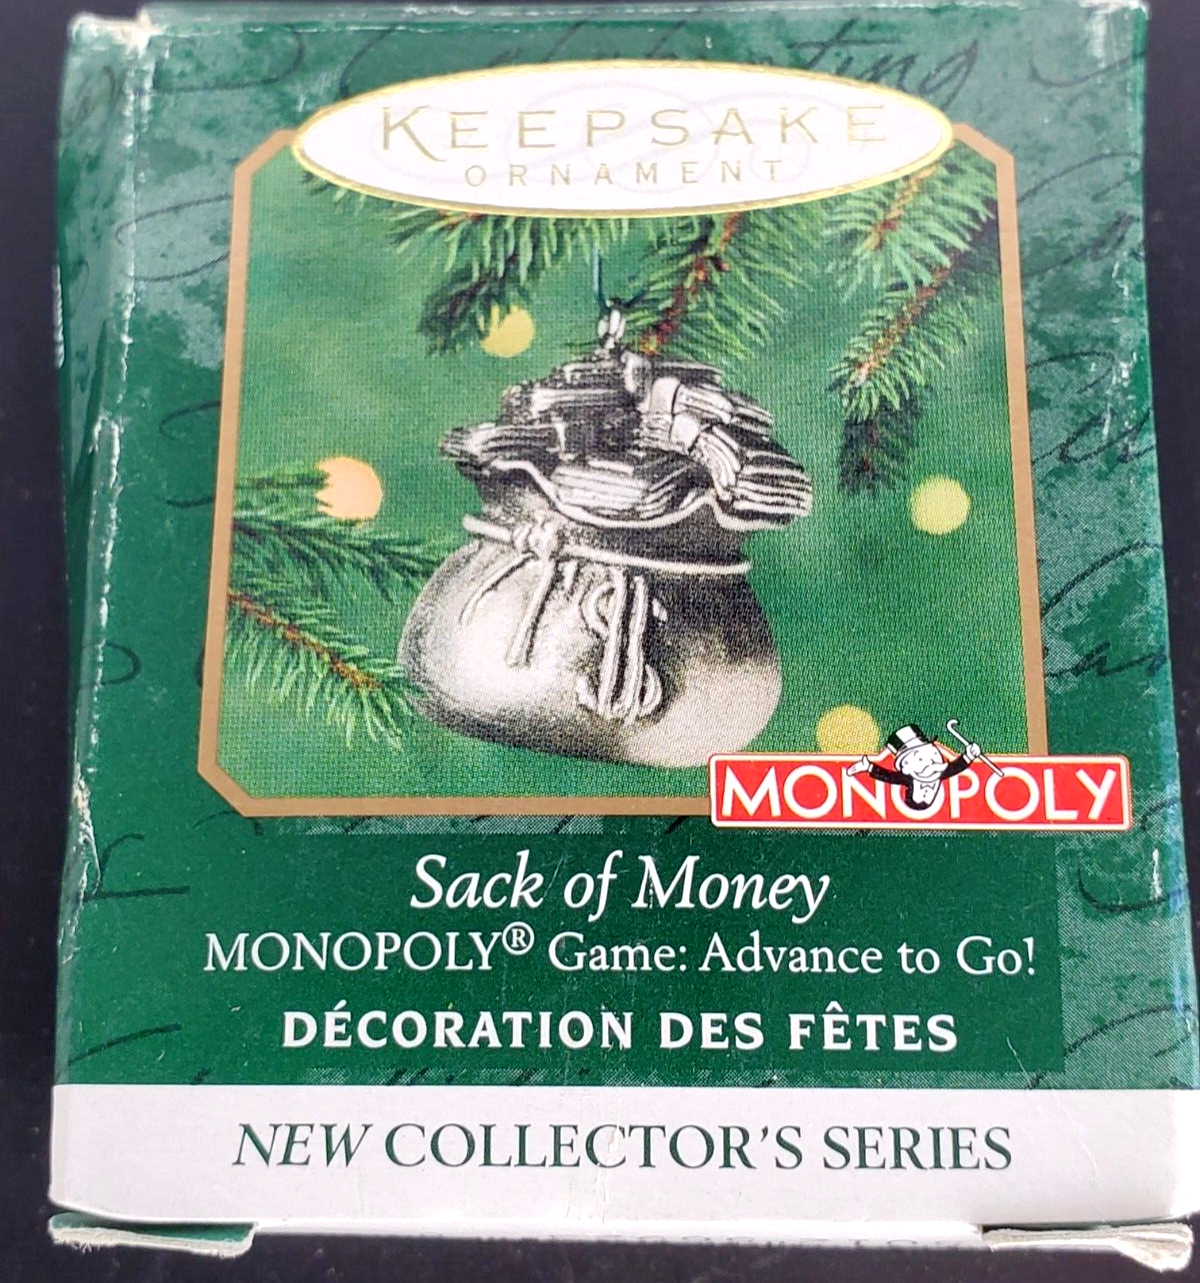 Primary image for Hallmark Monopoly Game: Advanced to Go Sack of Money Fine Pewter Ornament 2000 